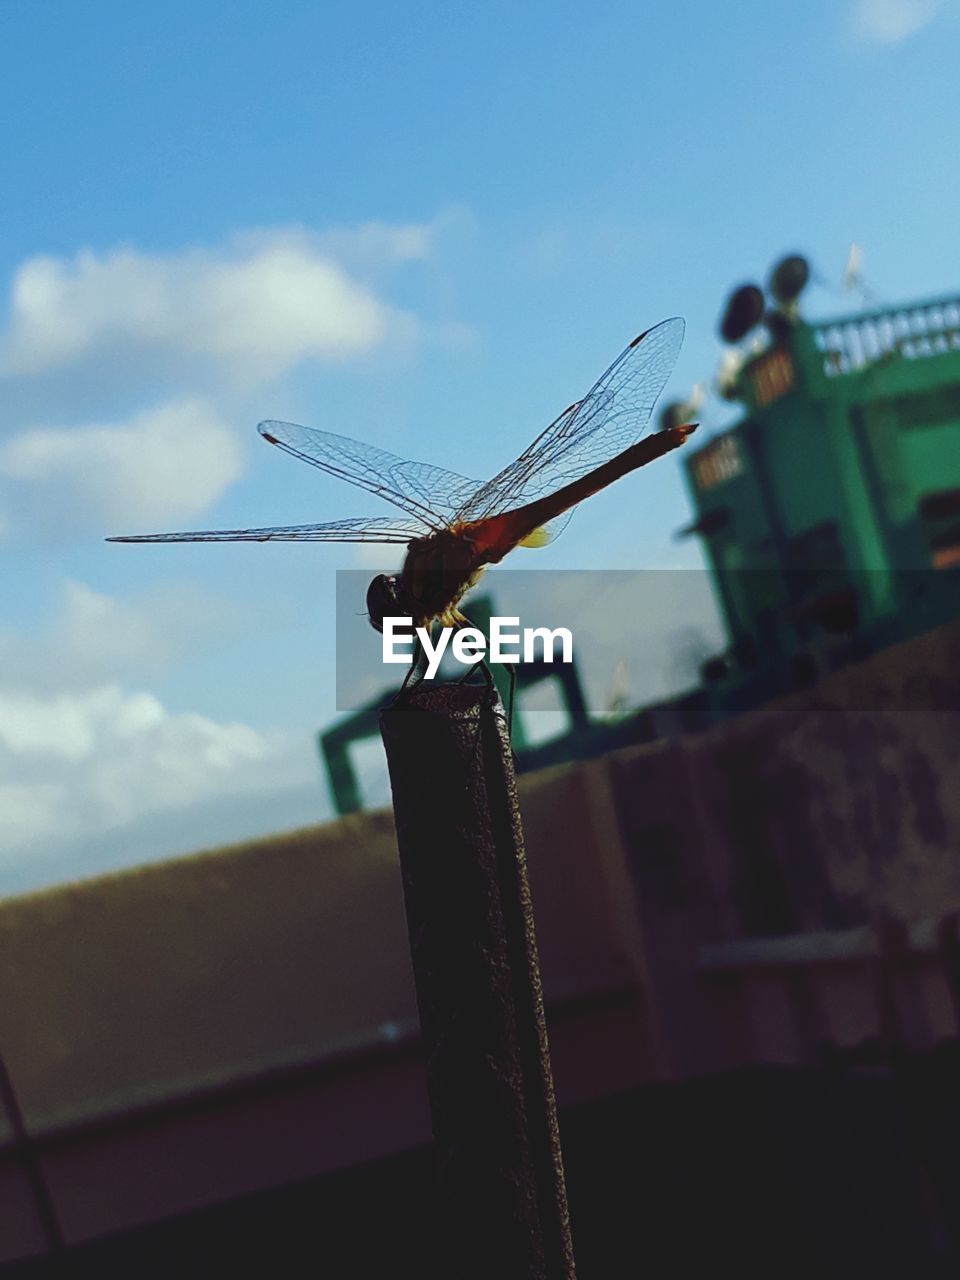 LOW ANGLE VIEW OF DRAGONFLY ON A METAL